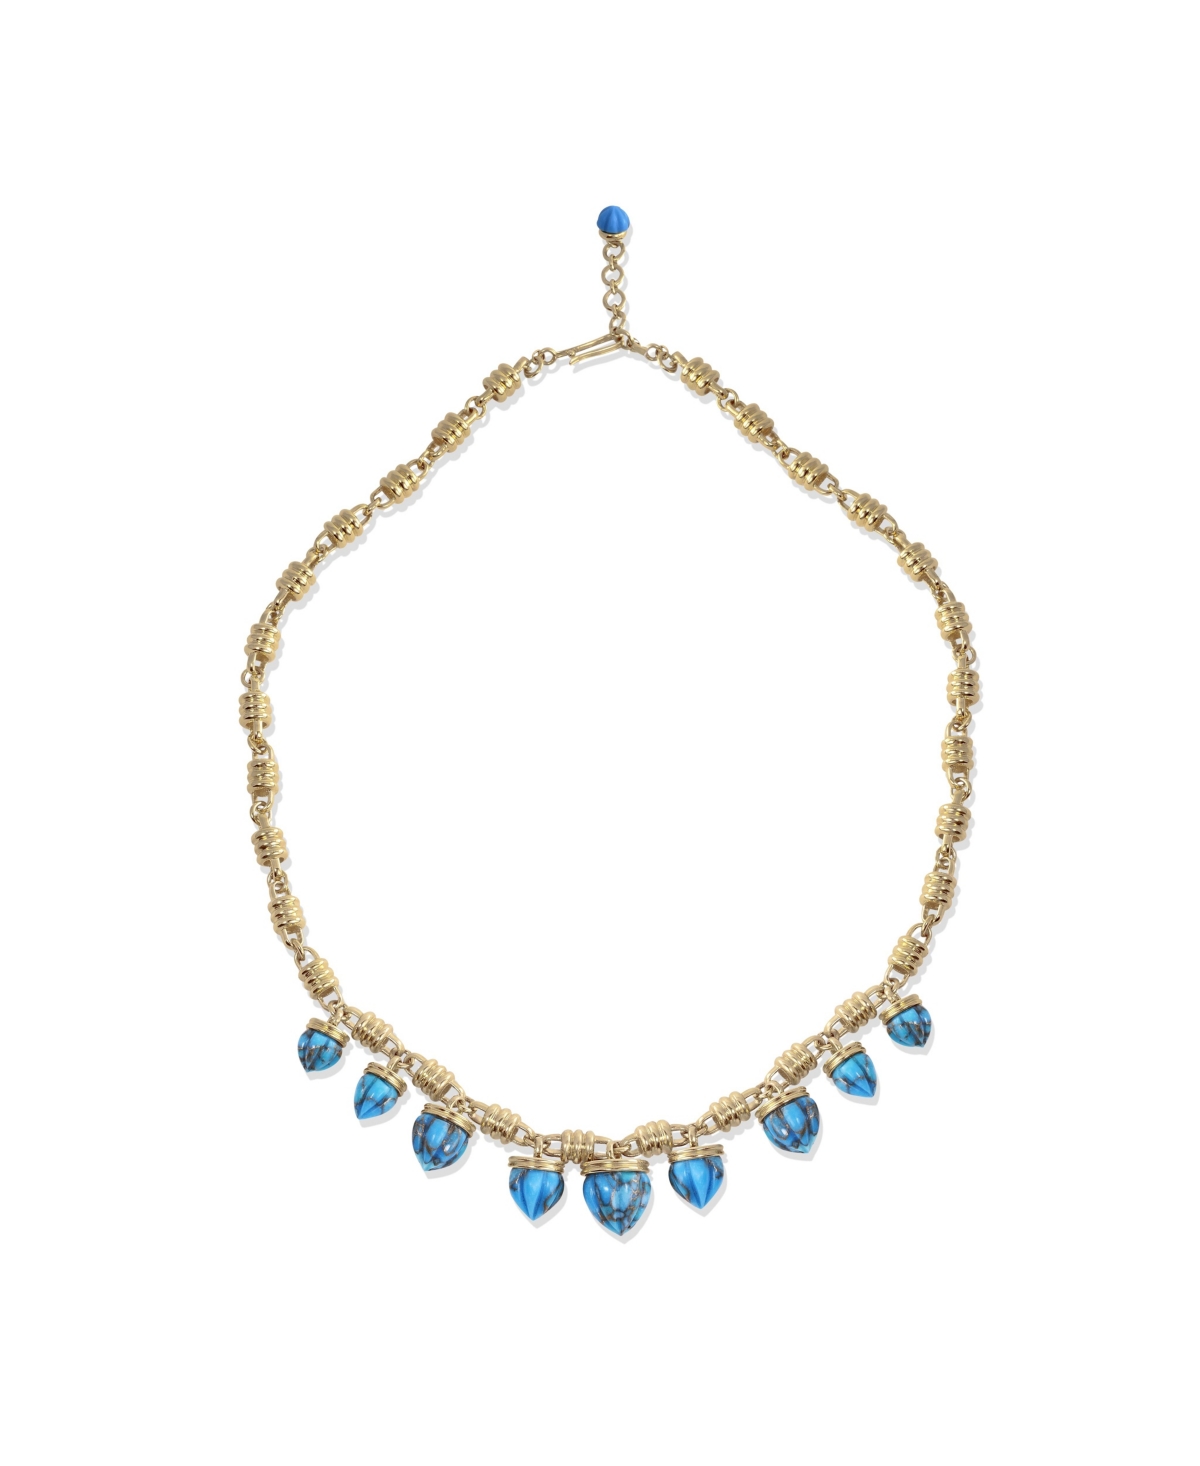 Sunshine Twist Design Yellow Gold Plated Silver Turquoise Gemstone Studded Necklace - Yellow